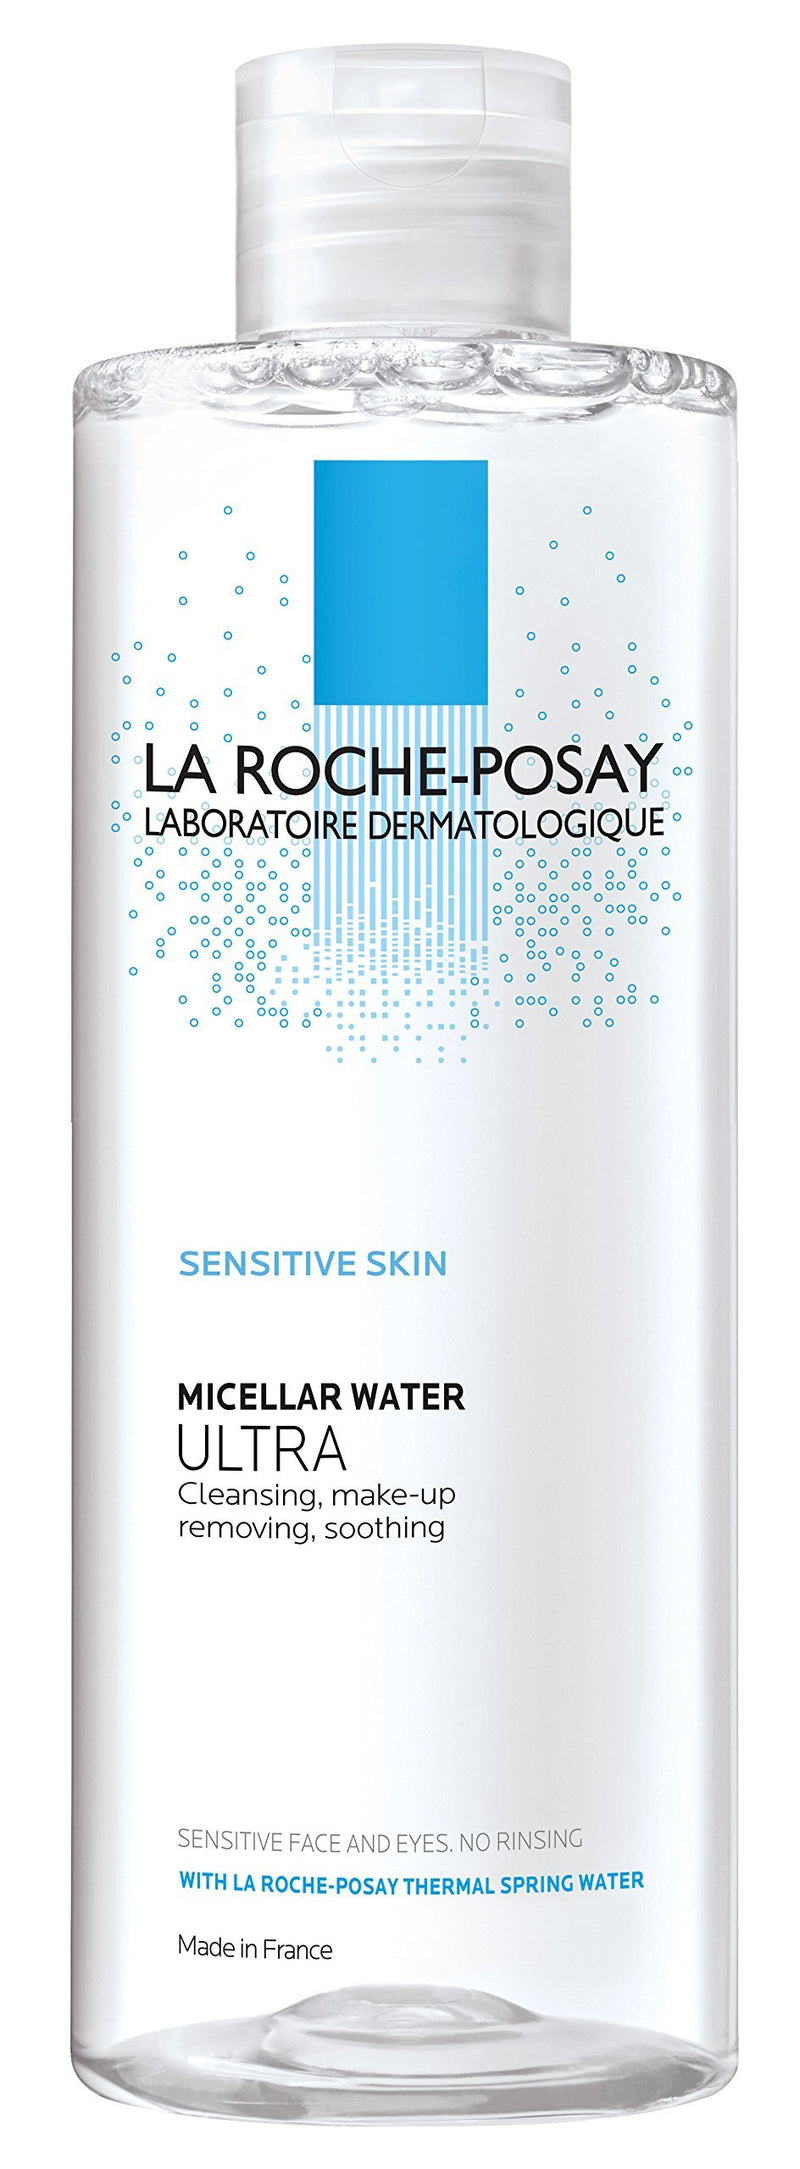 La Roche-Posay Micellar Cleansing Water and Makeup Remover 13.52 Fluid Ounce